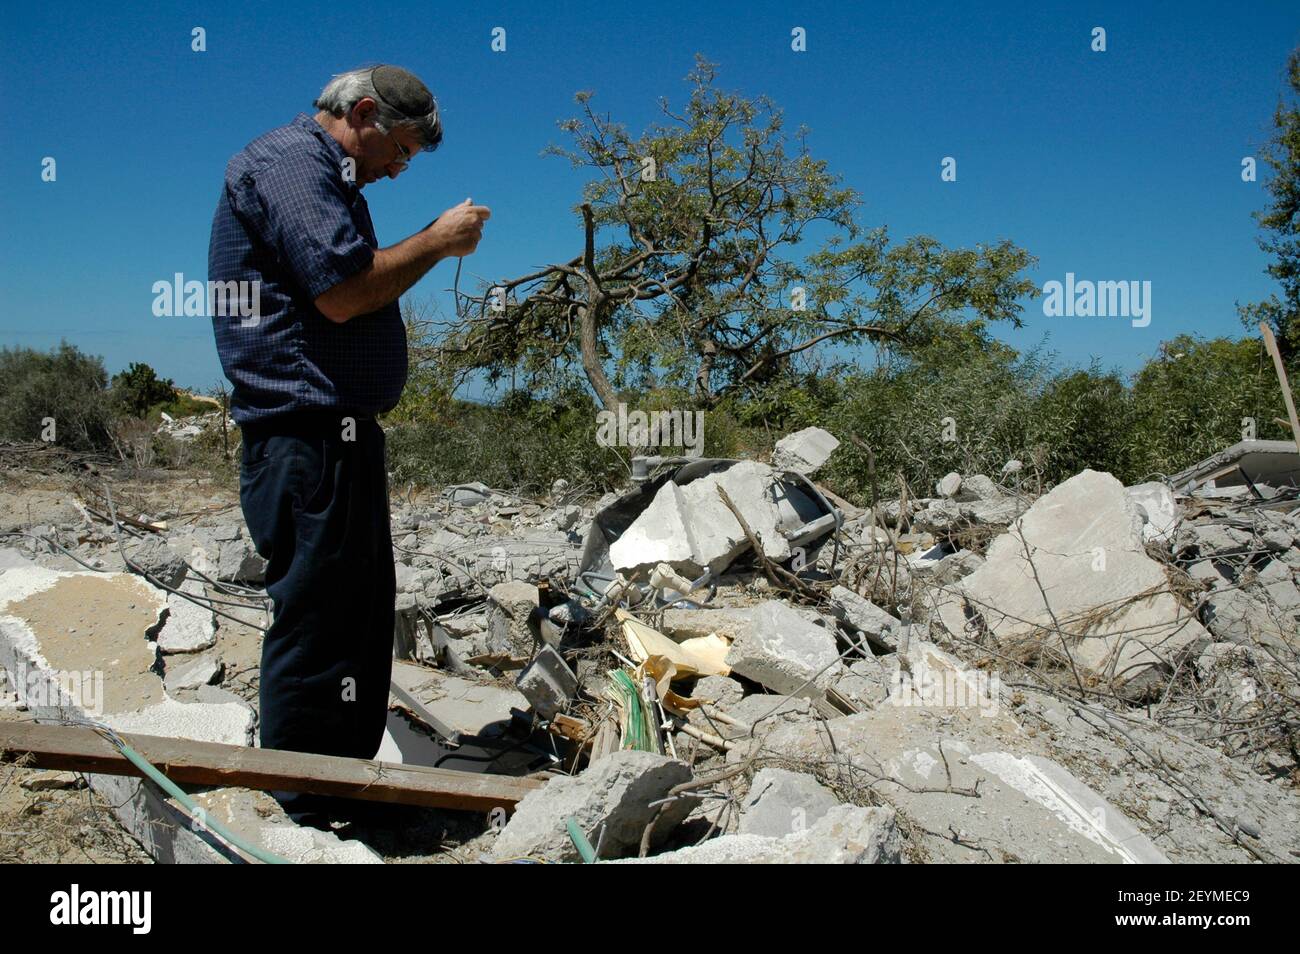 An Israeli man takes photo of rubble of demolished houses in what used to be the Jewish settlement of Neve Dekalim in Gaza Strip on 06 September 2005. Israel completed the evacuation of all 8,000 Jewish settlers from Gaza and several hundred more from four enclaves in the northern West Bank, after nearly 40 years of occupation. Stock Photo